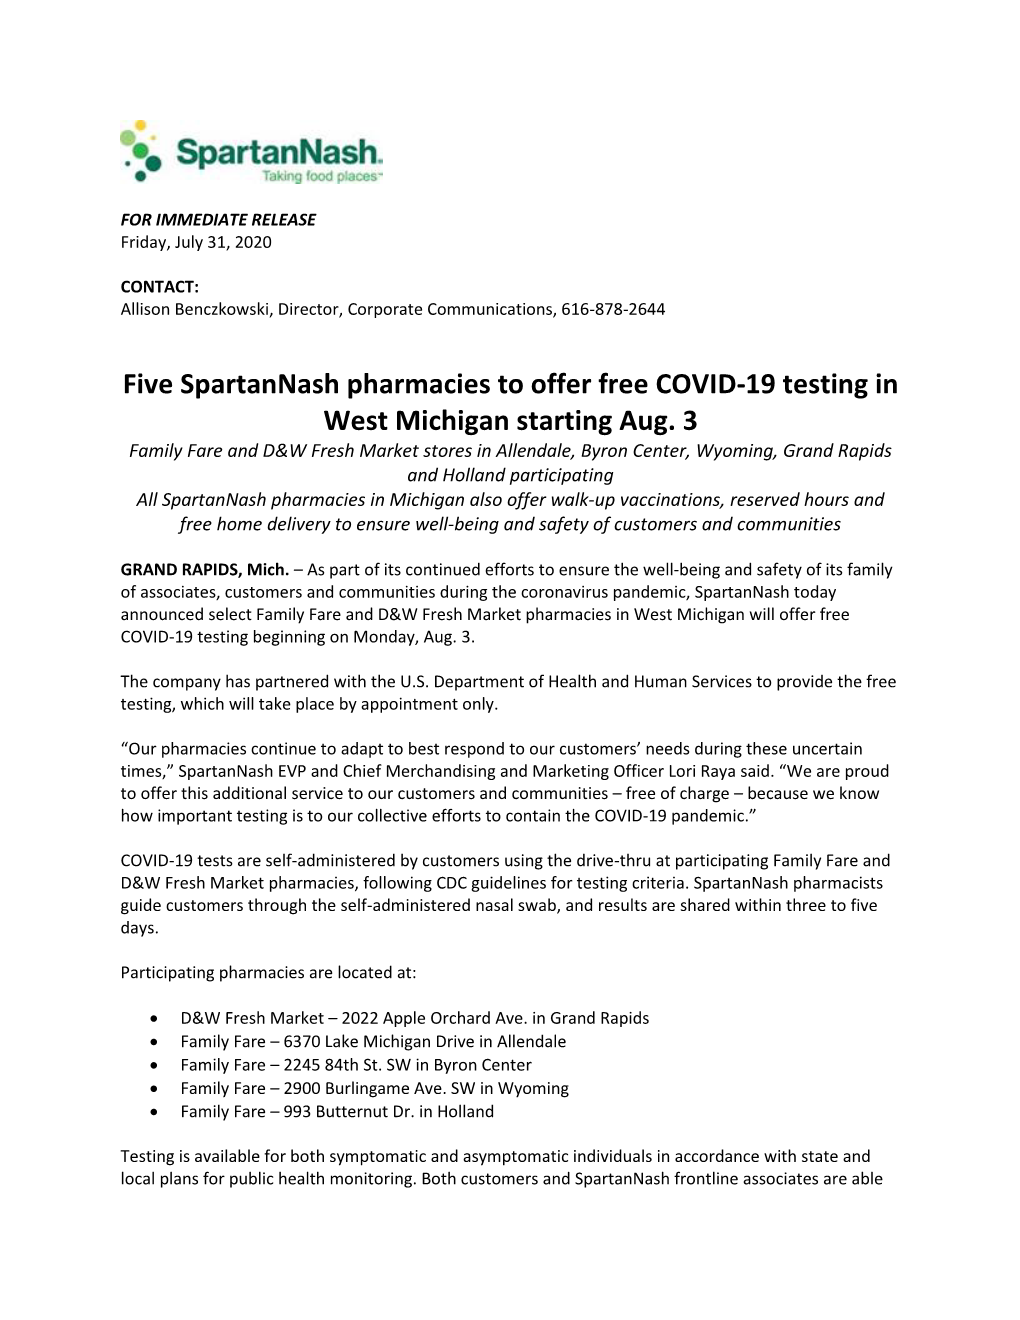 Five Spartannash Pharmacies to Offer Free COVID-19 Testing in West Michigan Starting Aug